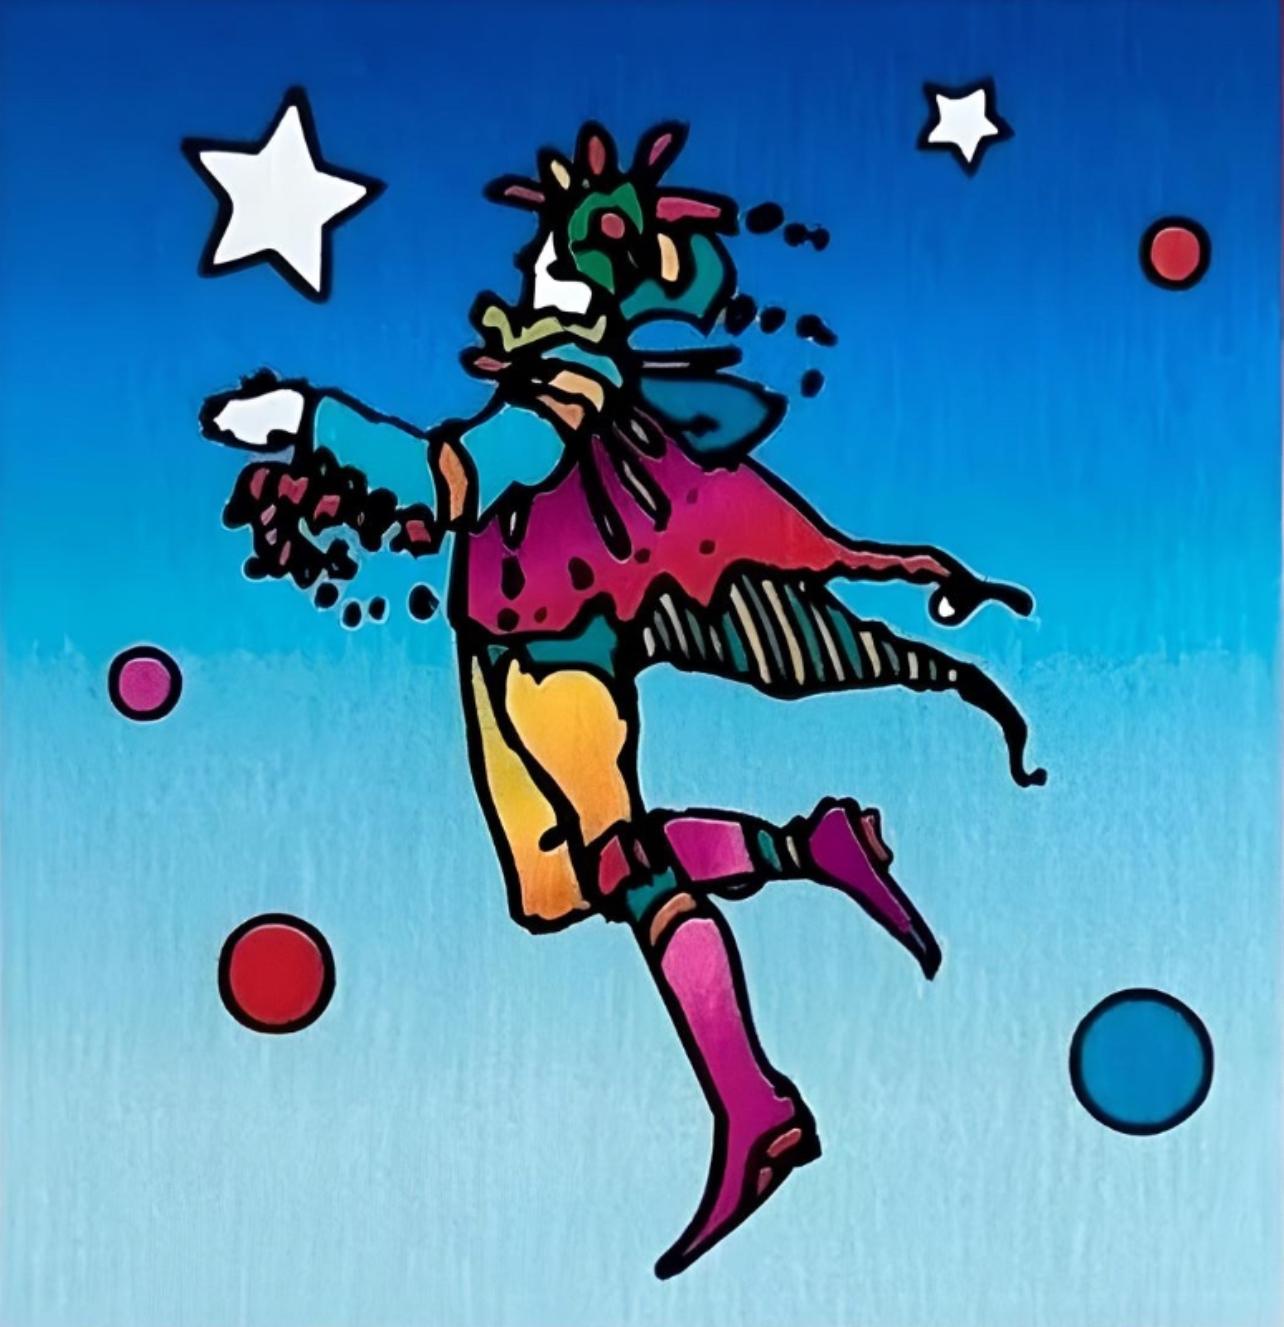 Artist: Peter Max (1937)
Title: Star Catcher on Blue
Year: 2002
Edition: 487/500, plus proofs
Medium: Lithograph on Lustro Saxony paper
Size: 4.87 x 4.5 inches
Condition: Excellent
Inscription: Signed and numbered by the artist.
Notes: Published by